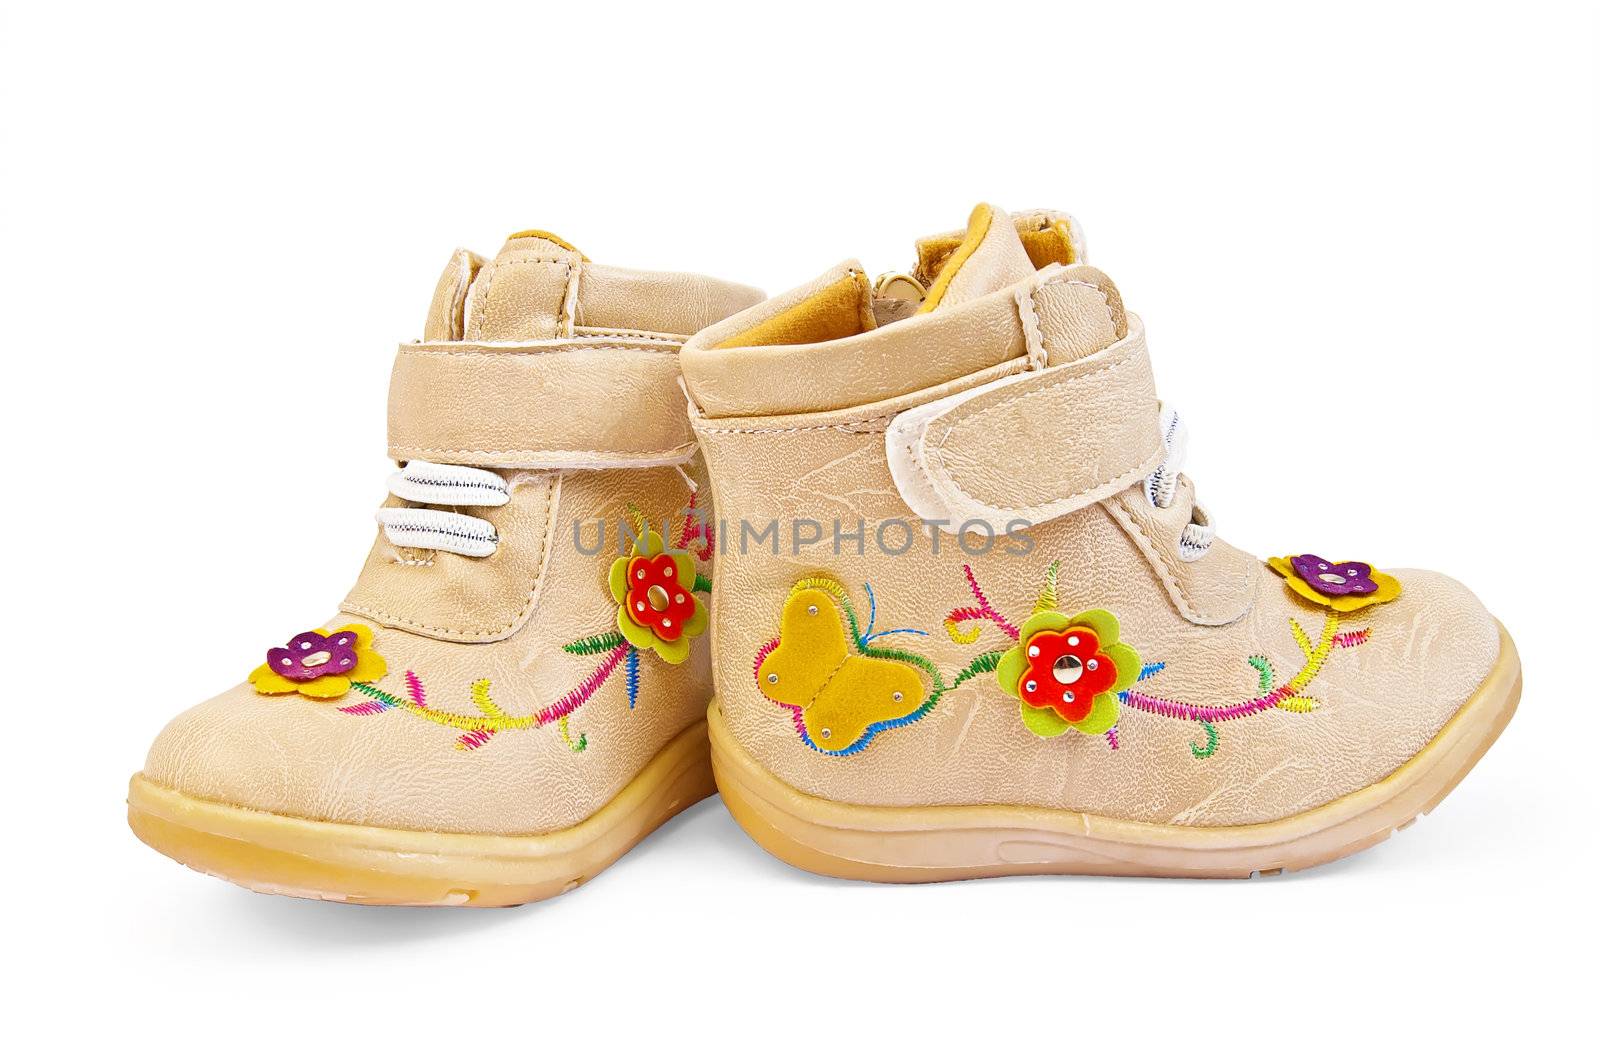 Beige baby shoes for girls with embroidery and applique isolated on a white background